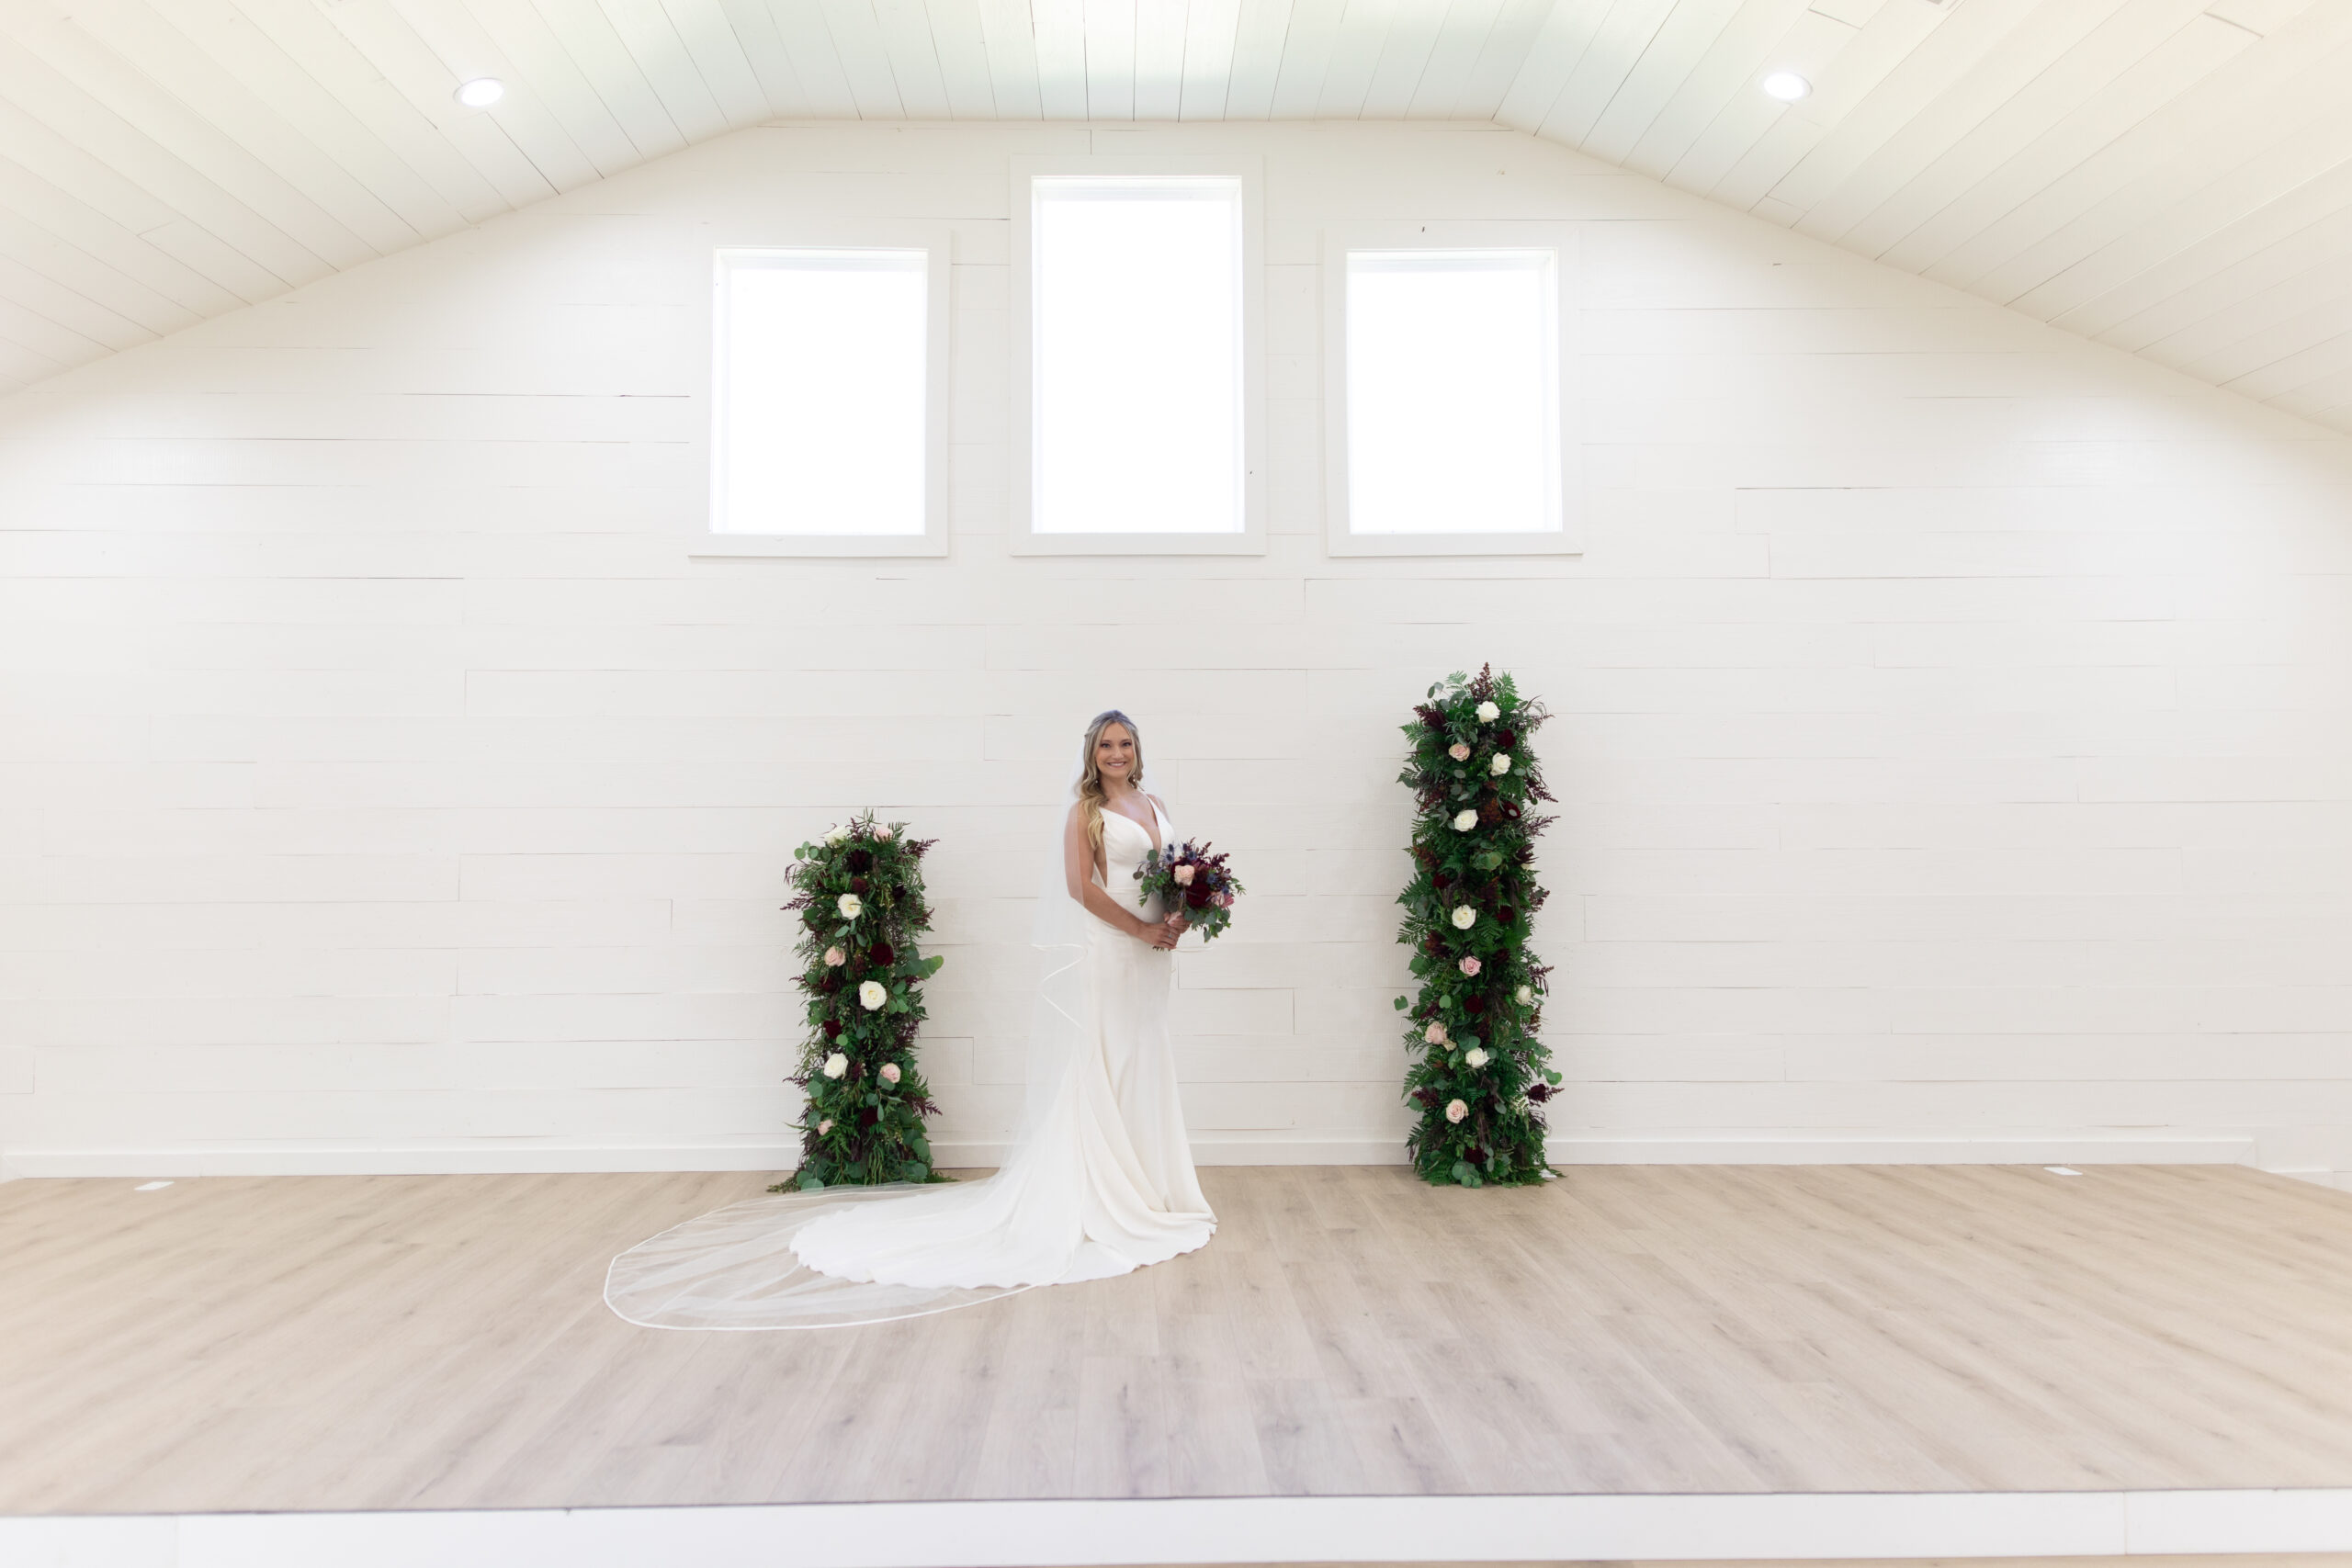 Bride portrait in hummingbird hill tx chapel taken by cecilly elaine photography